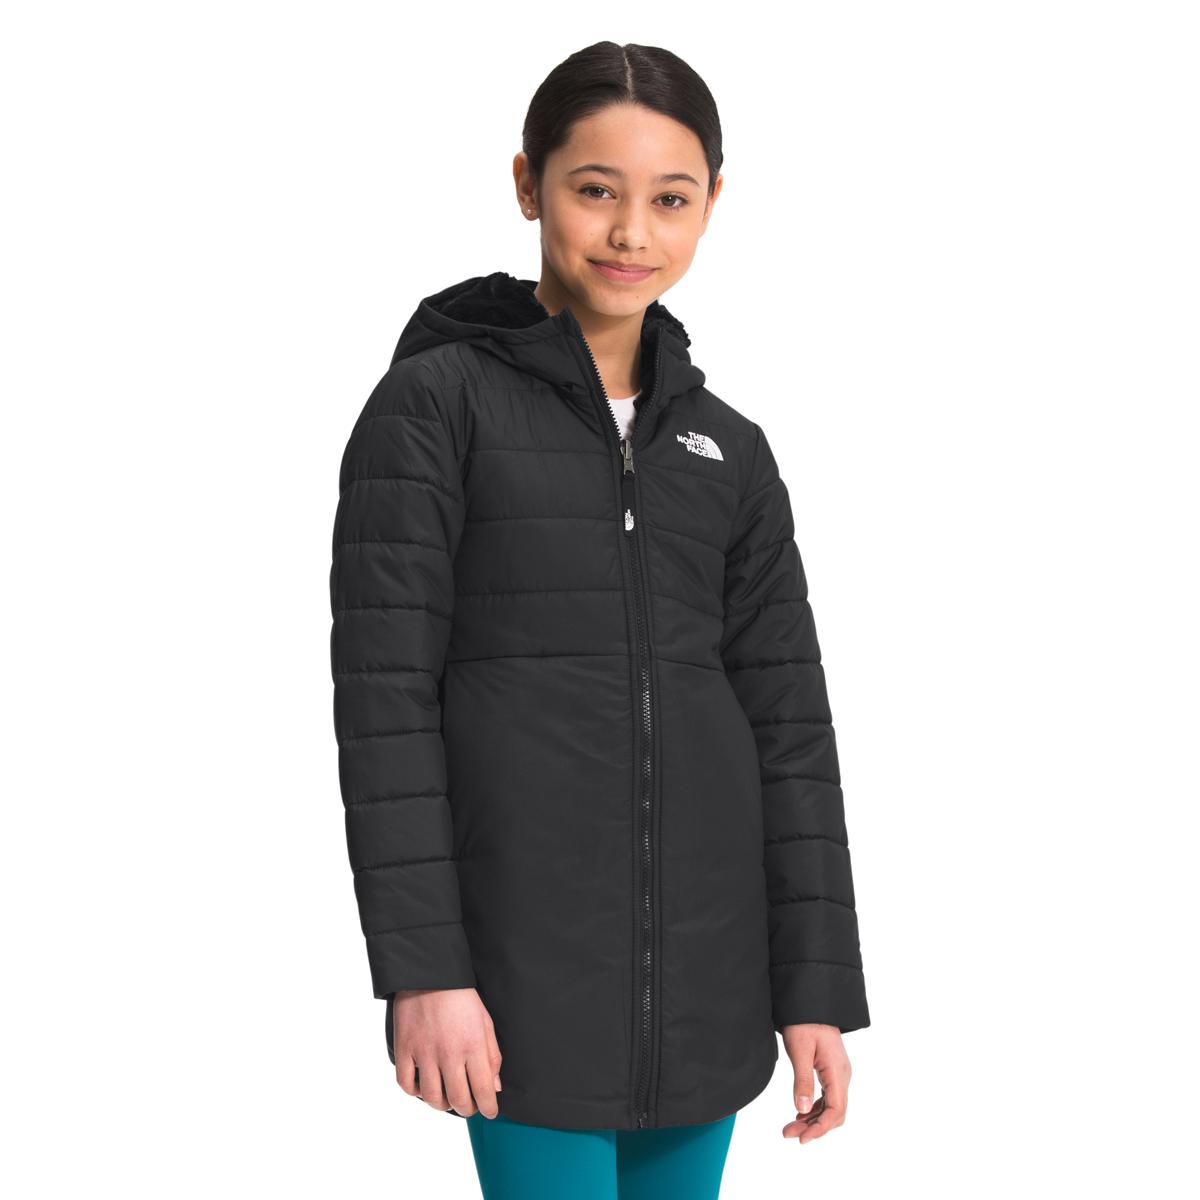 The North Face Kids REVERSIBLE MOSSBUD SWI BLACK - Paragon Sports